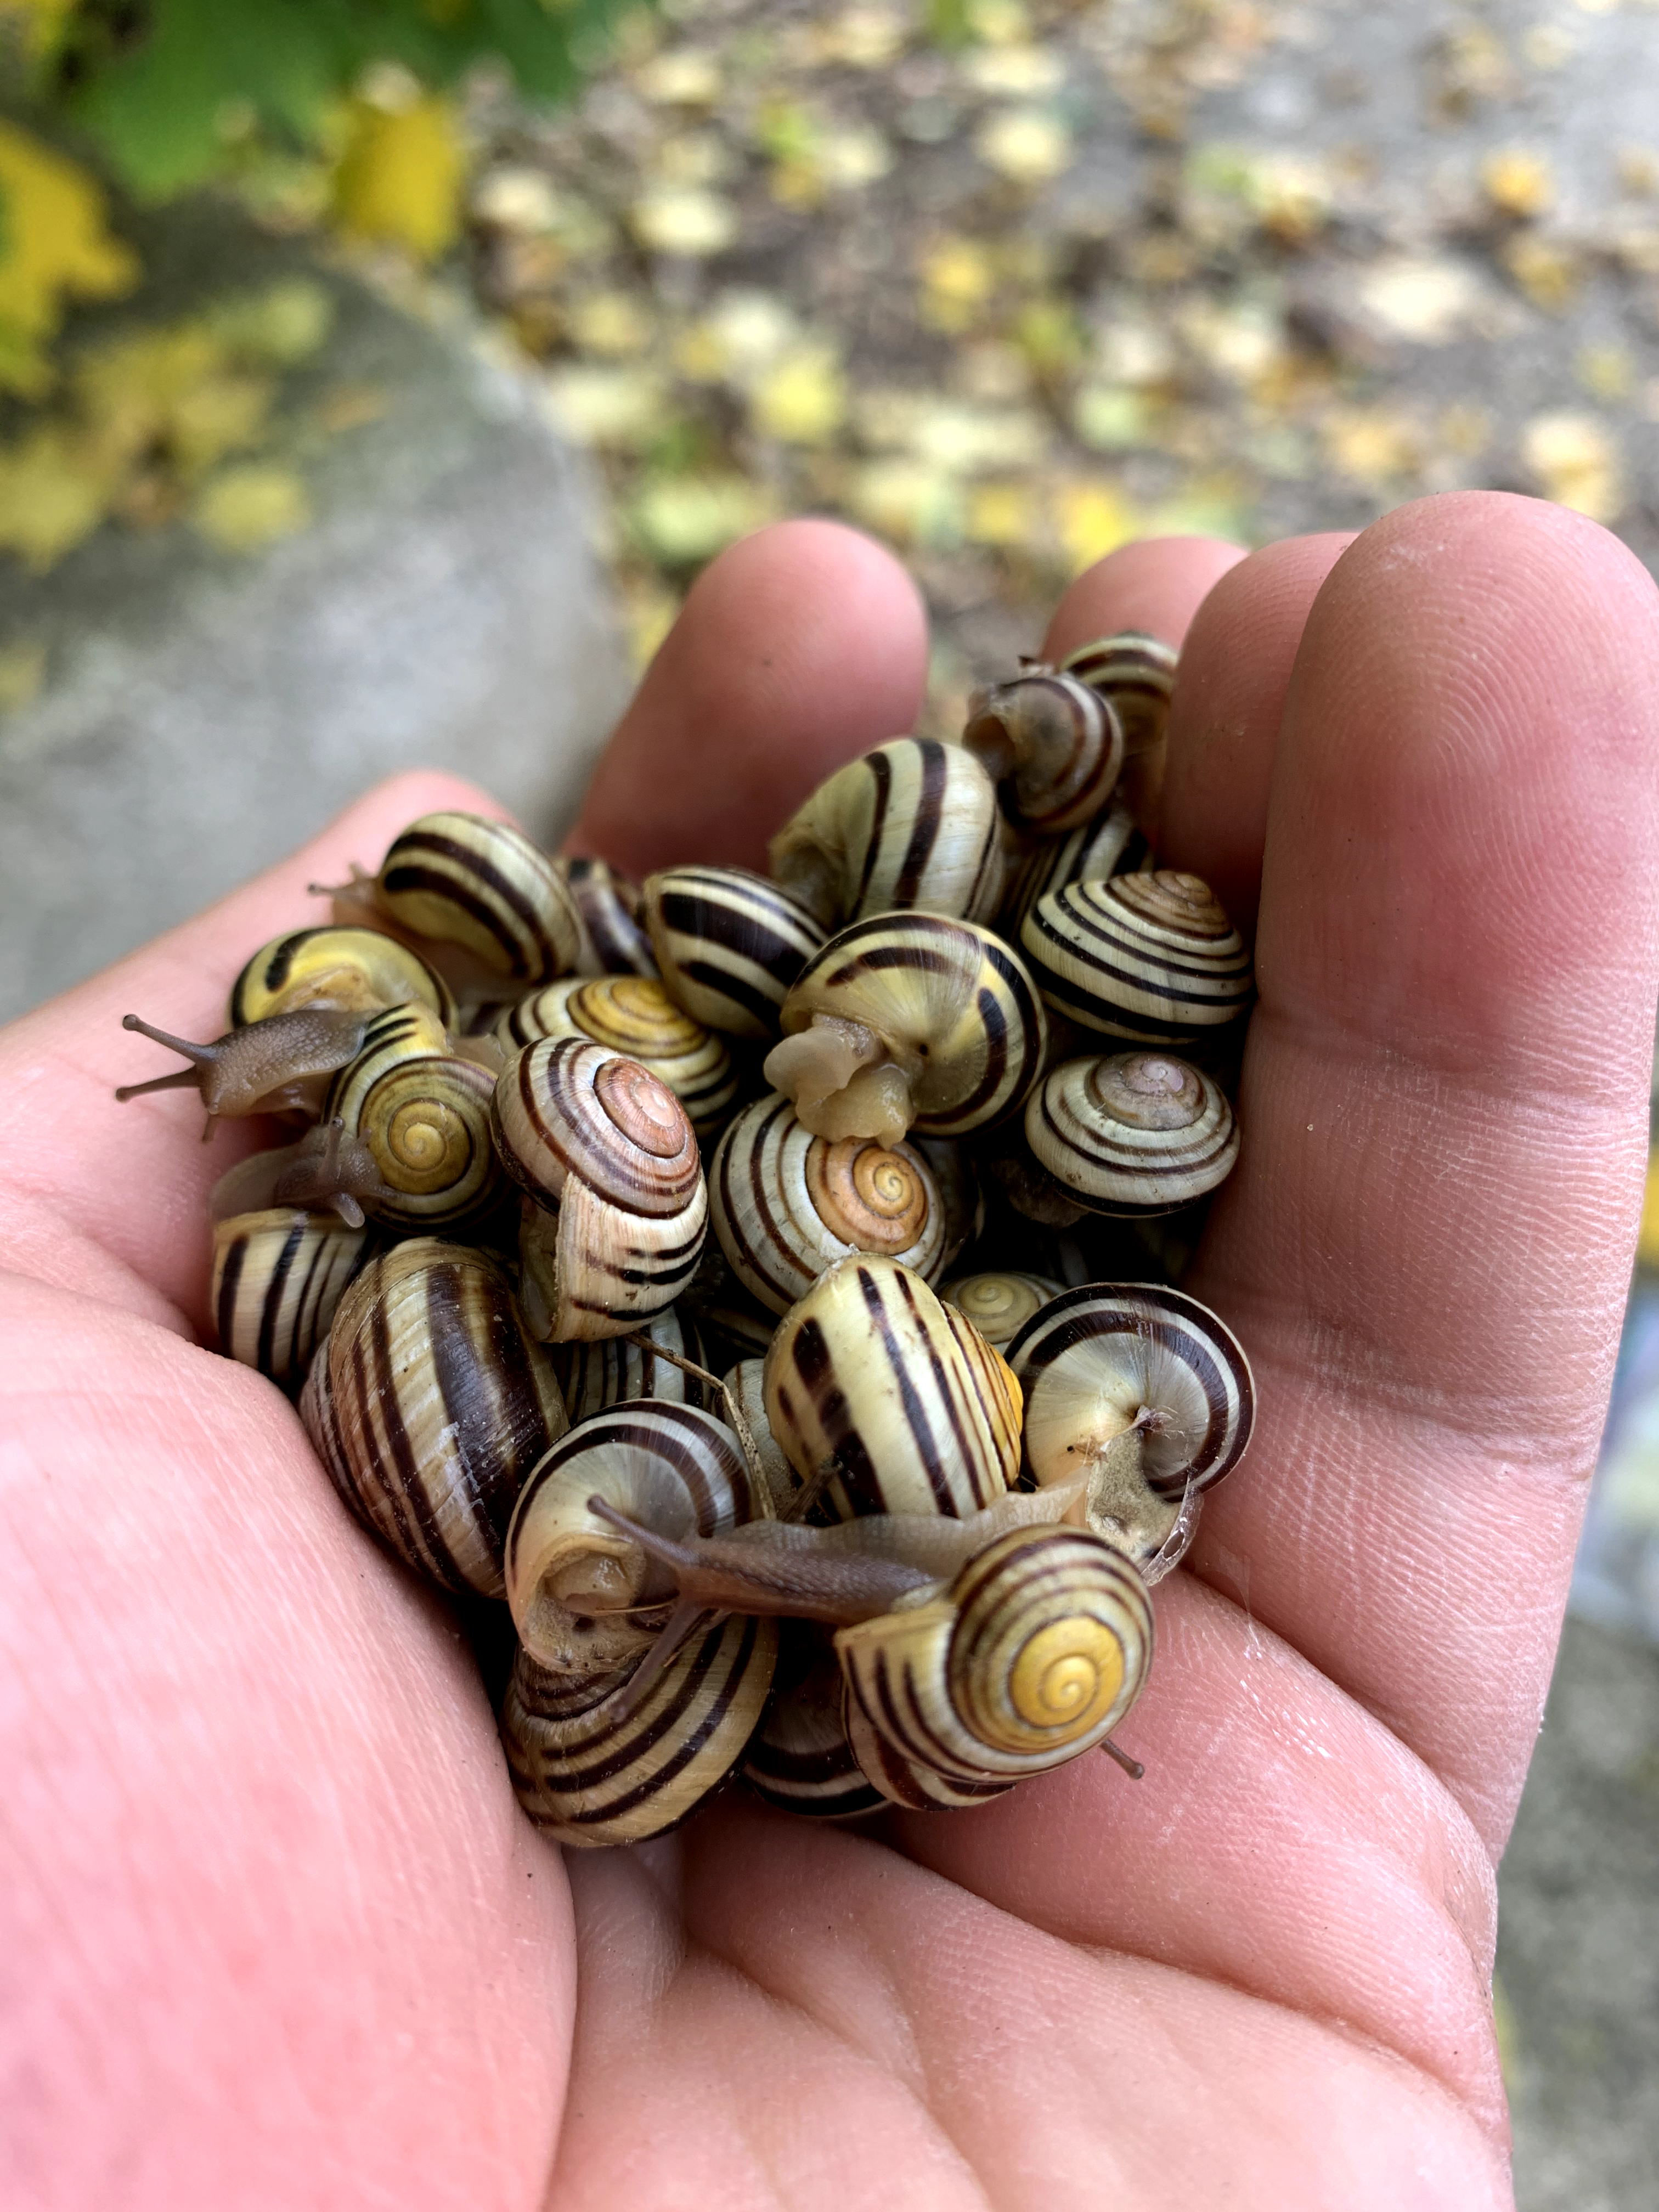 A collection of snails in a hand